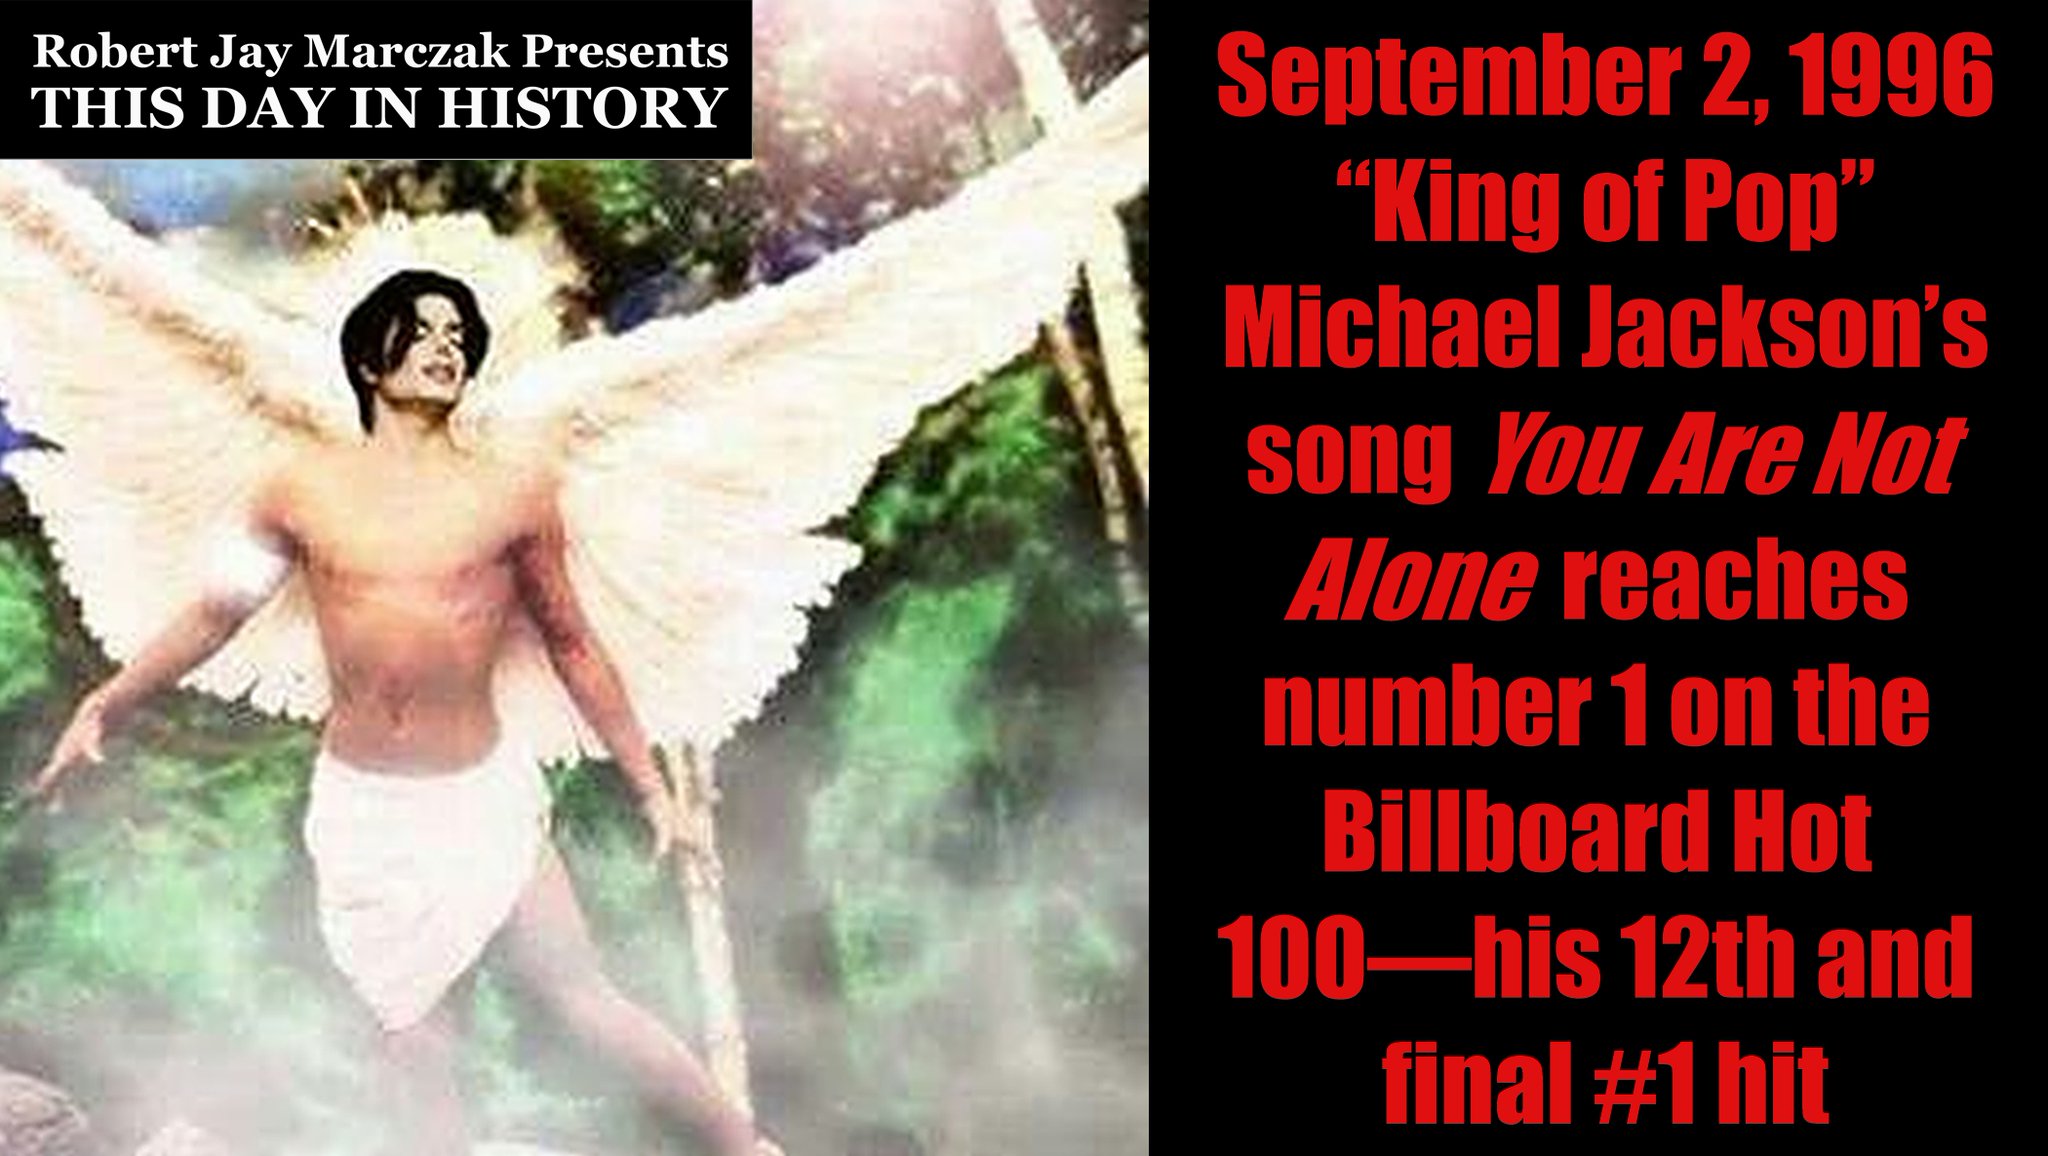 ᖇoᗷeᖇt ᒍᗩy ᗰᗩᖇᑕᘔᗩk September 2 1996 King Of Pop Michael Jackson S Song You Are Not Alone Reaches Number 1 On The Billboard Hot 100 His 12th And Final 1 Hit